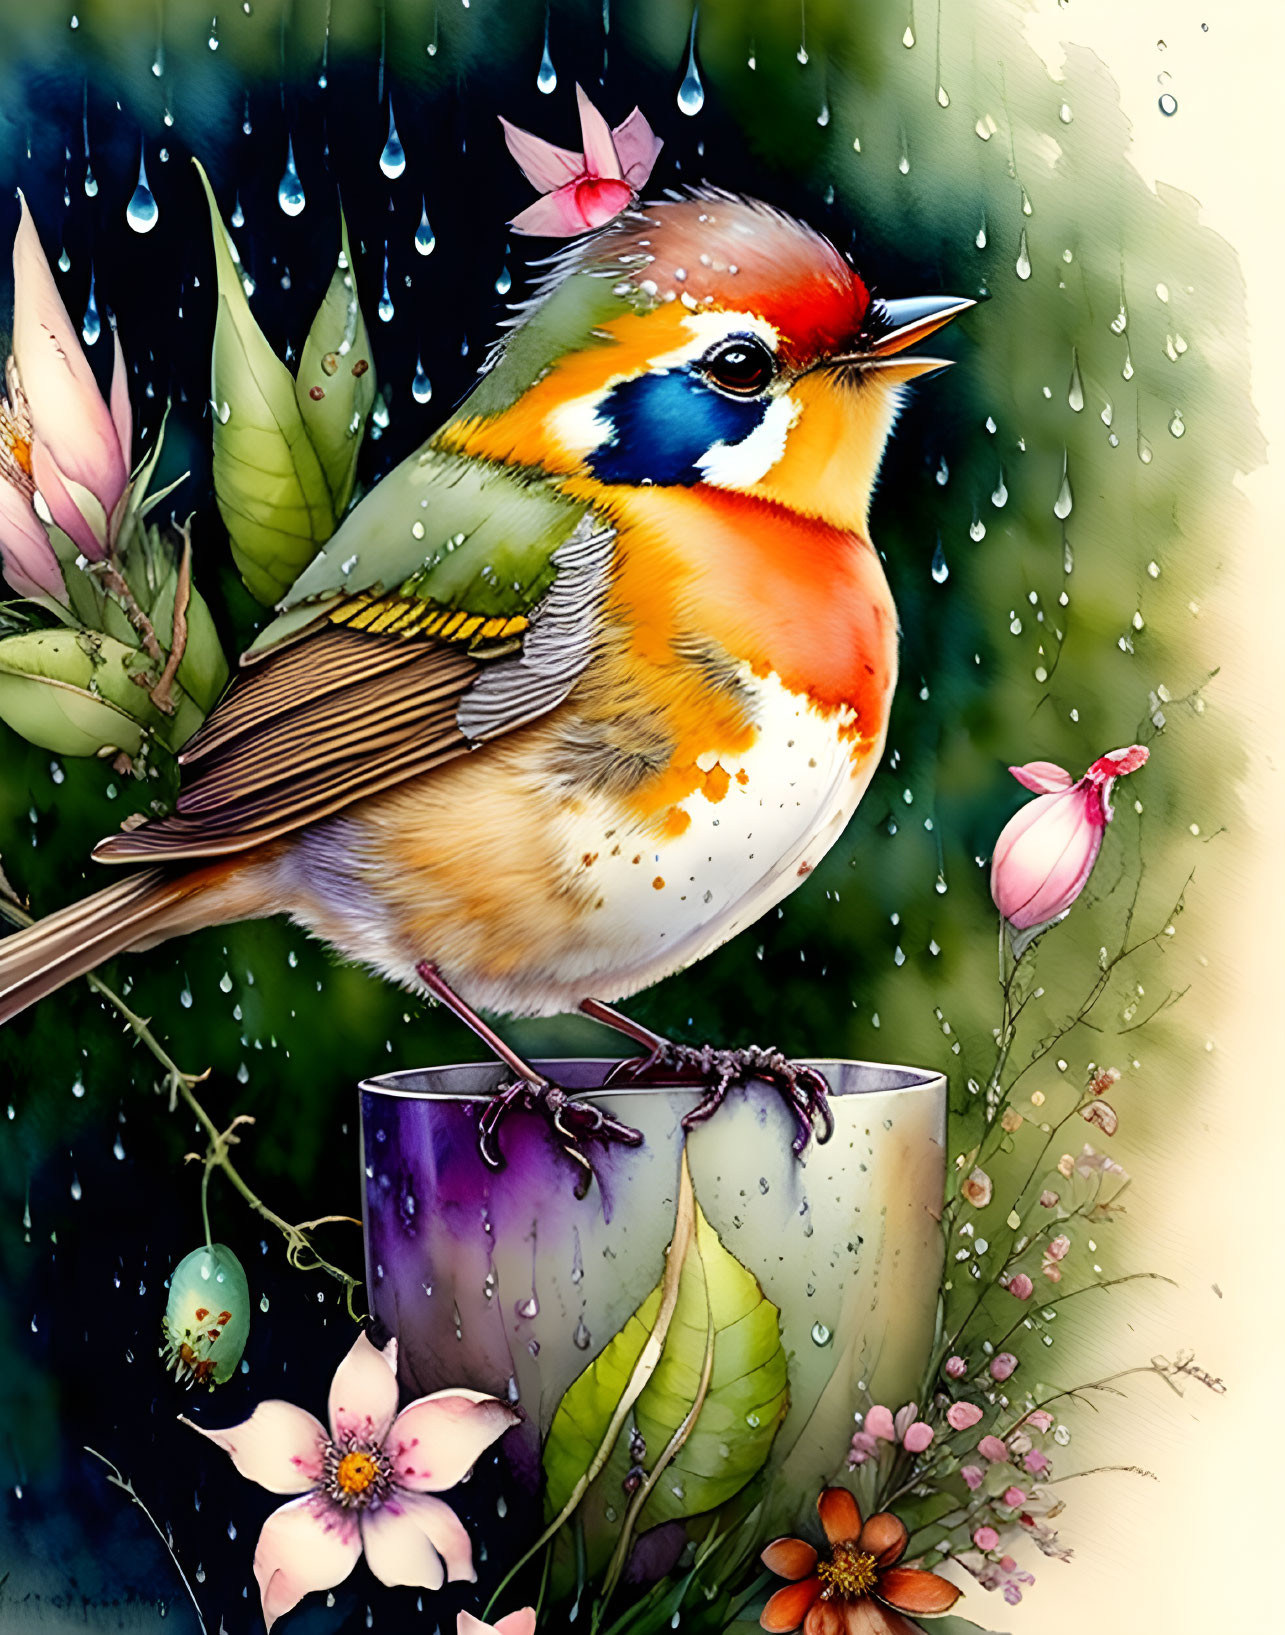 Colorful Bird Perched on Pipe with Raindrops, Leaves, Flowers, and Ornament